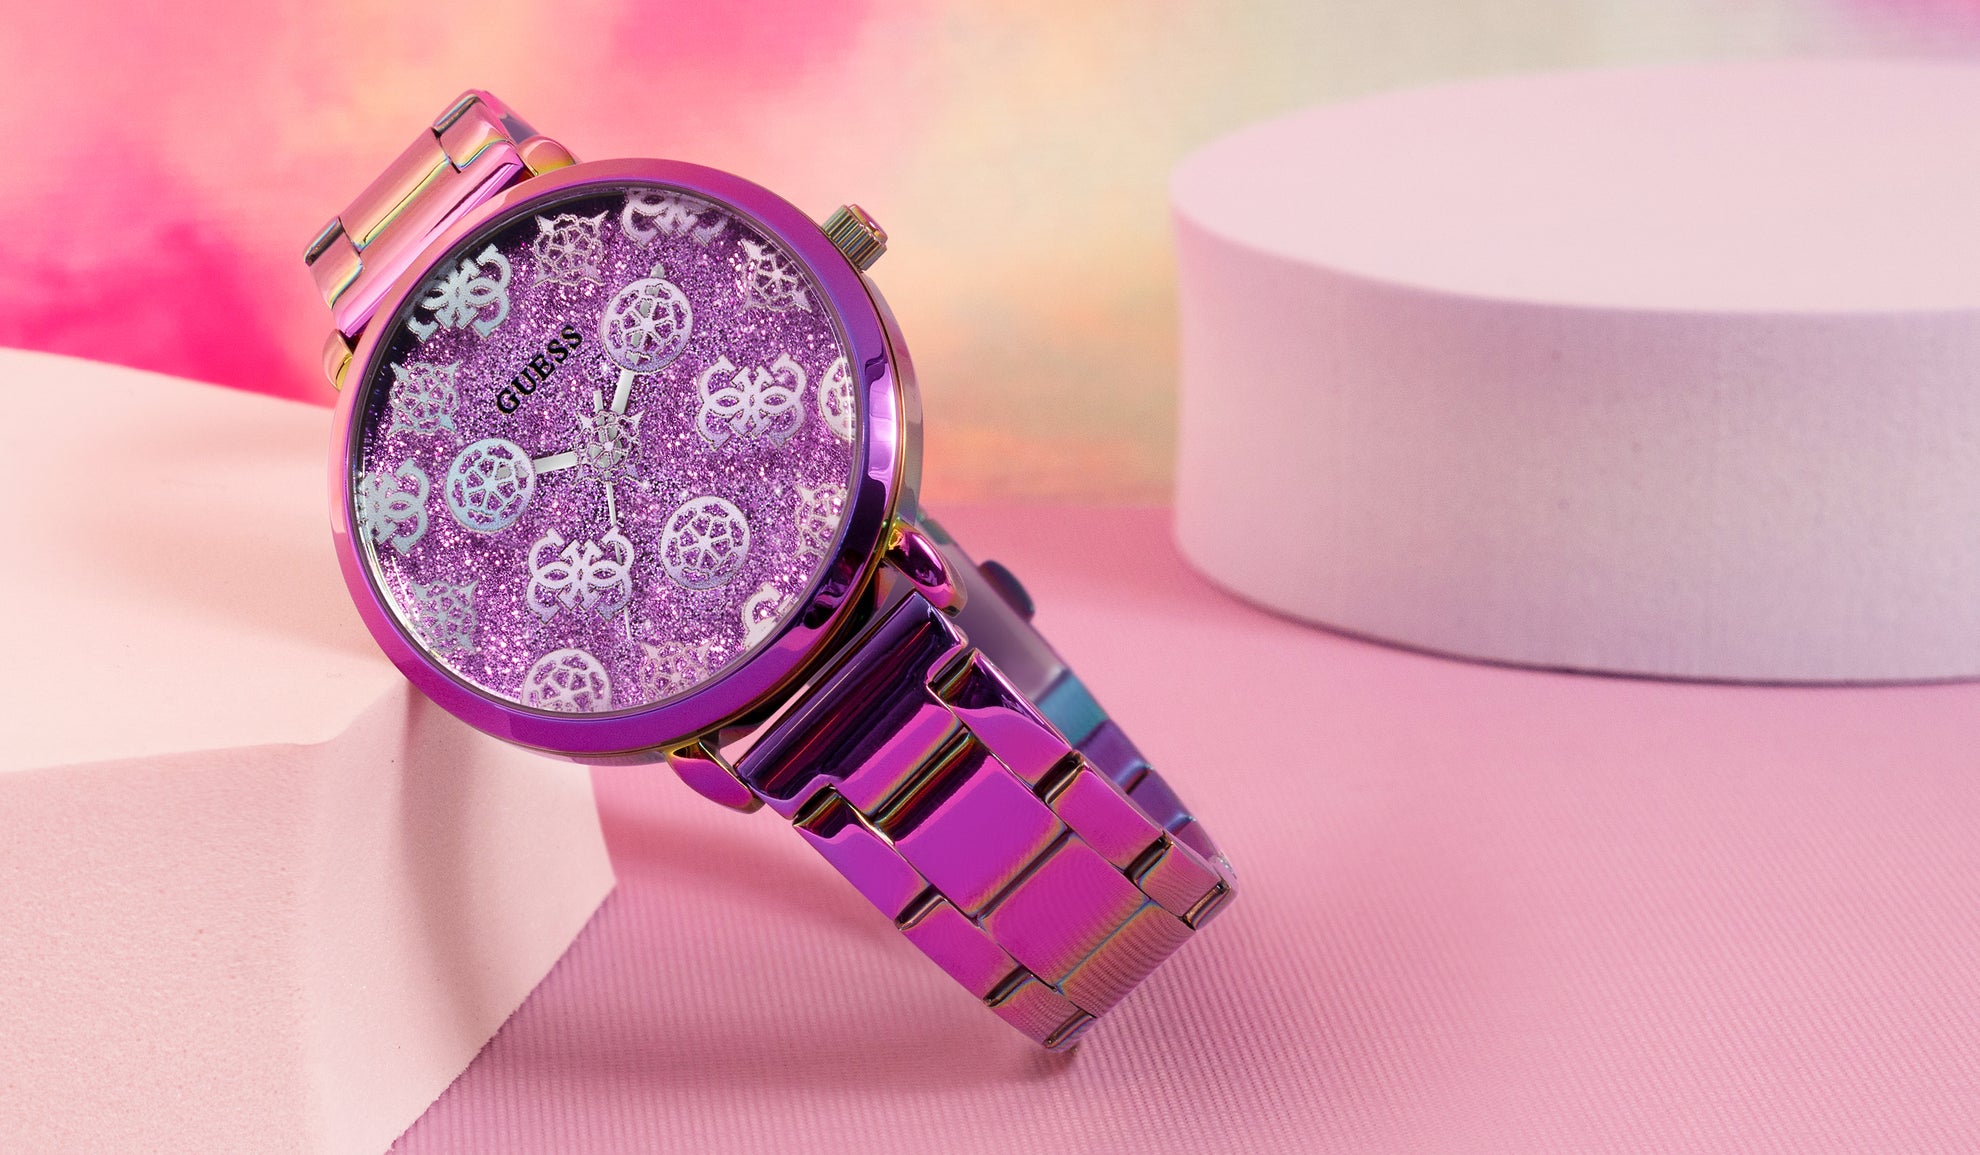 iridescent watch with logo print on dial